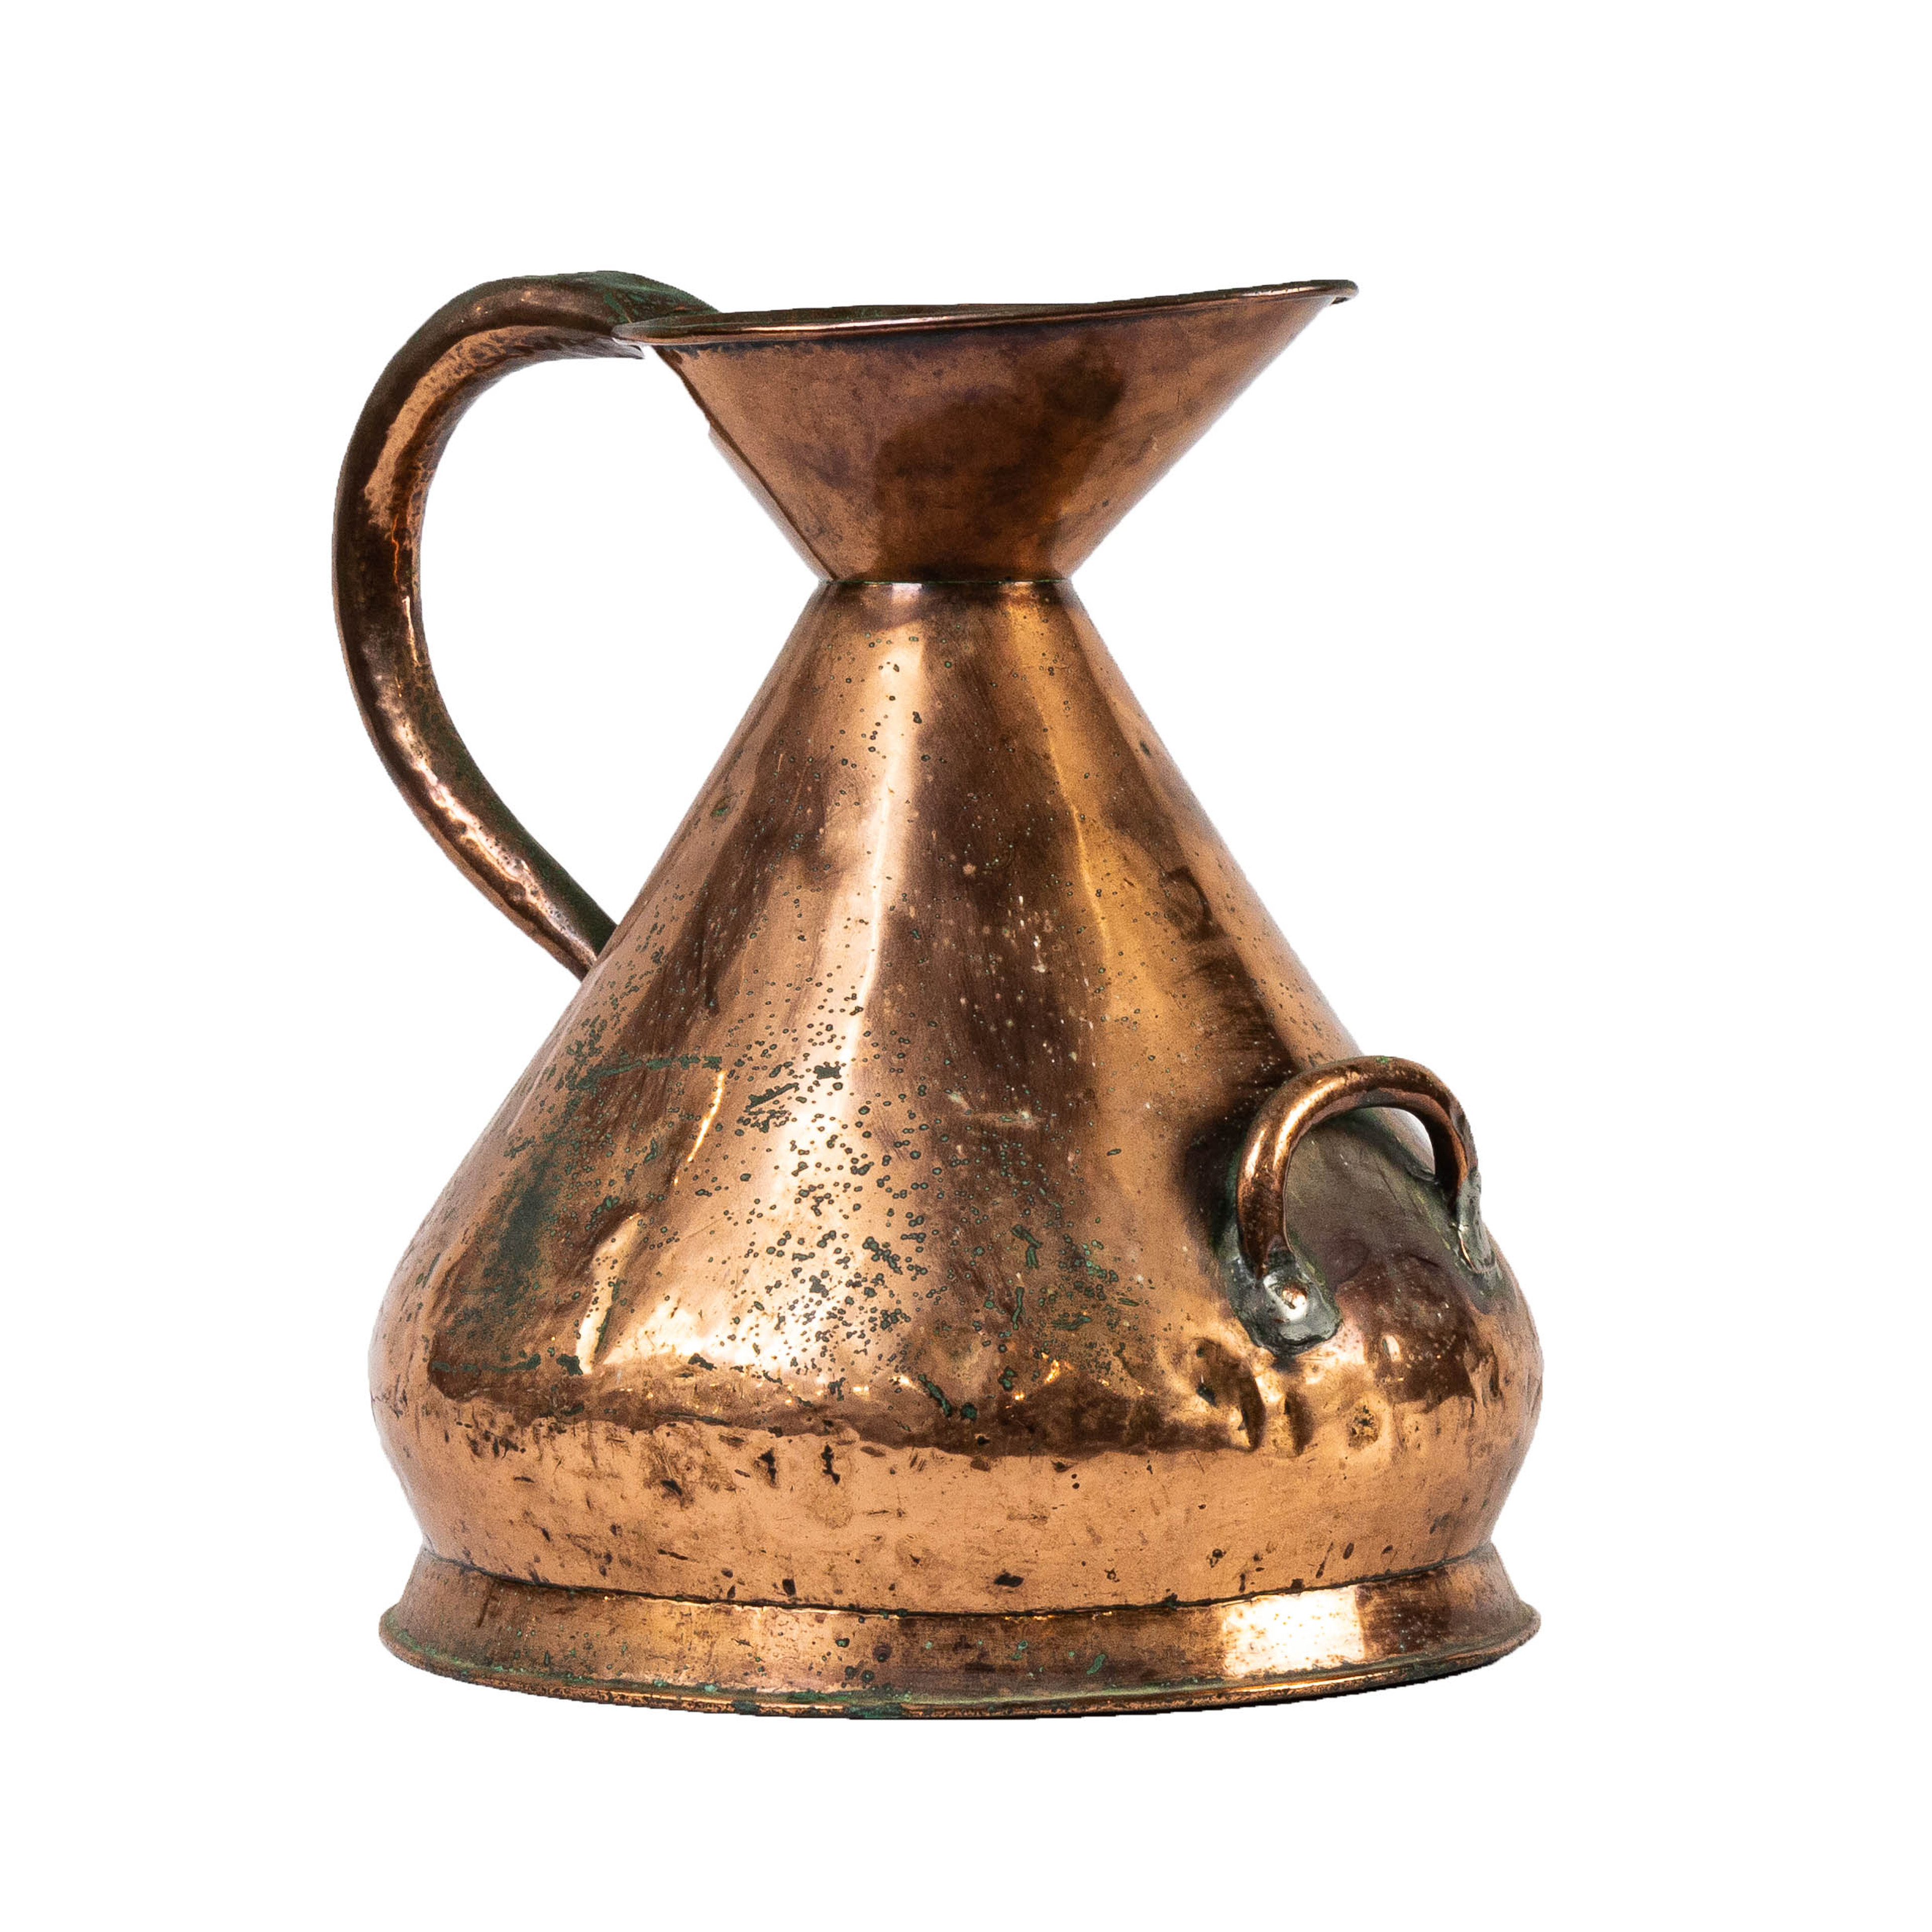 LARGE FRENCH COPPER MILK PITCHER 3a4ca7